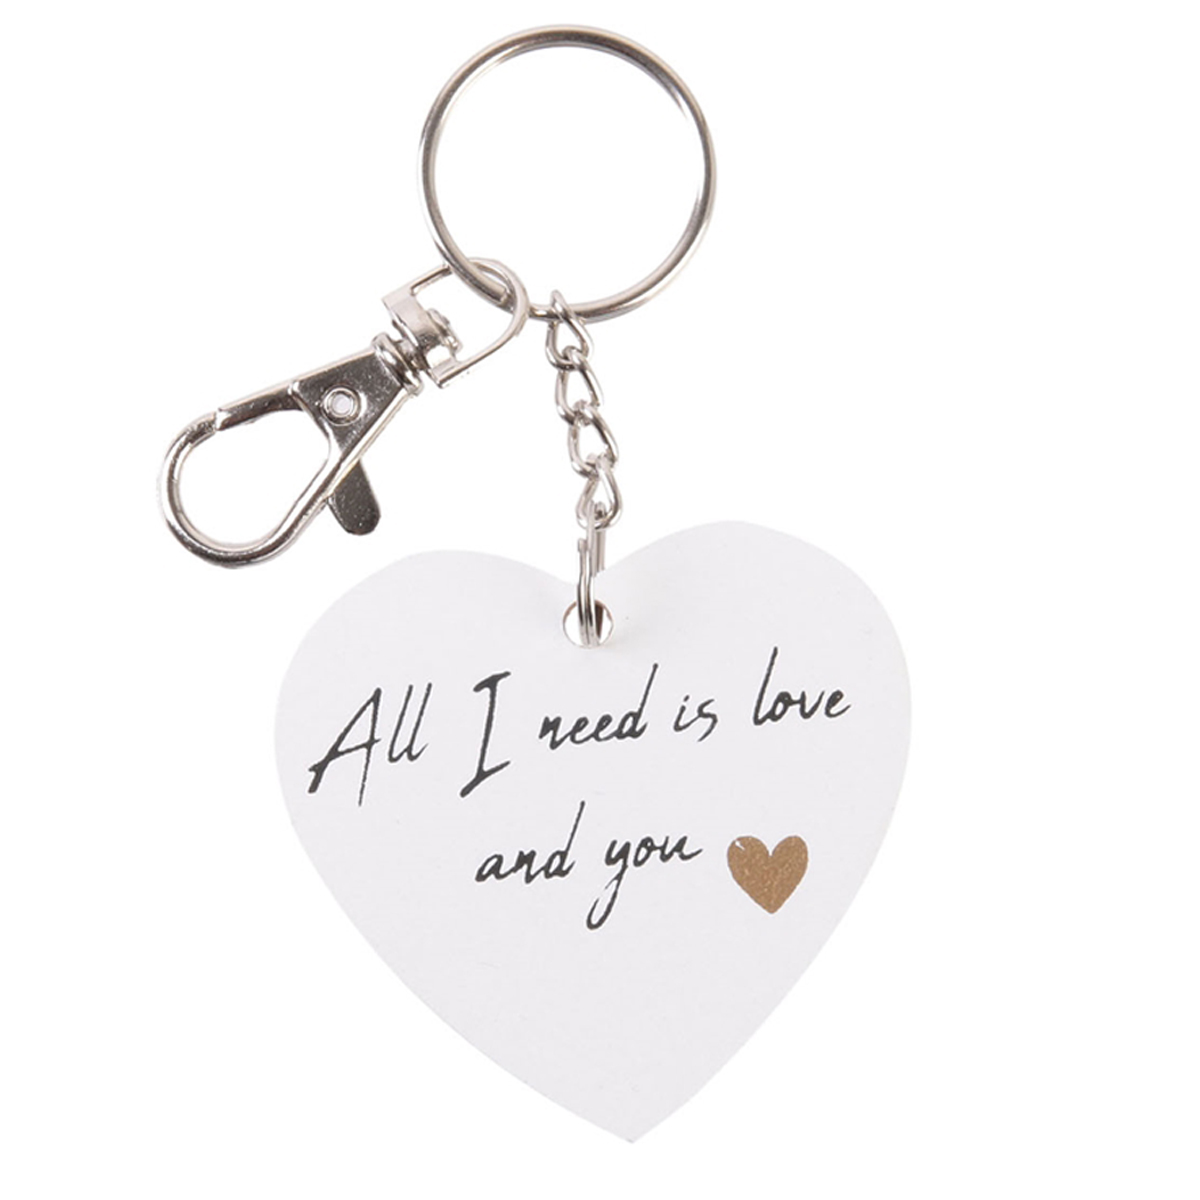 Porte-clés bois coeur \'Mots d\'Amour\' blanc (All i need is love and you) - 5x5 cm - [Q3272]